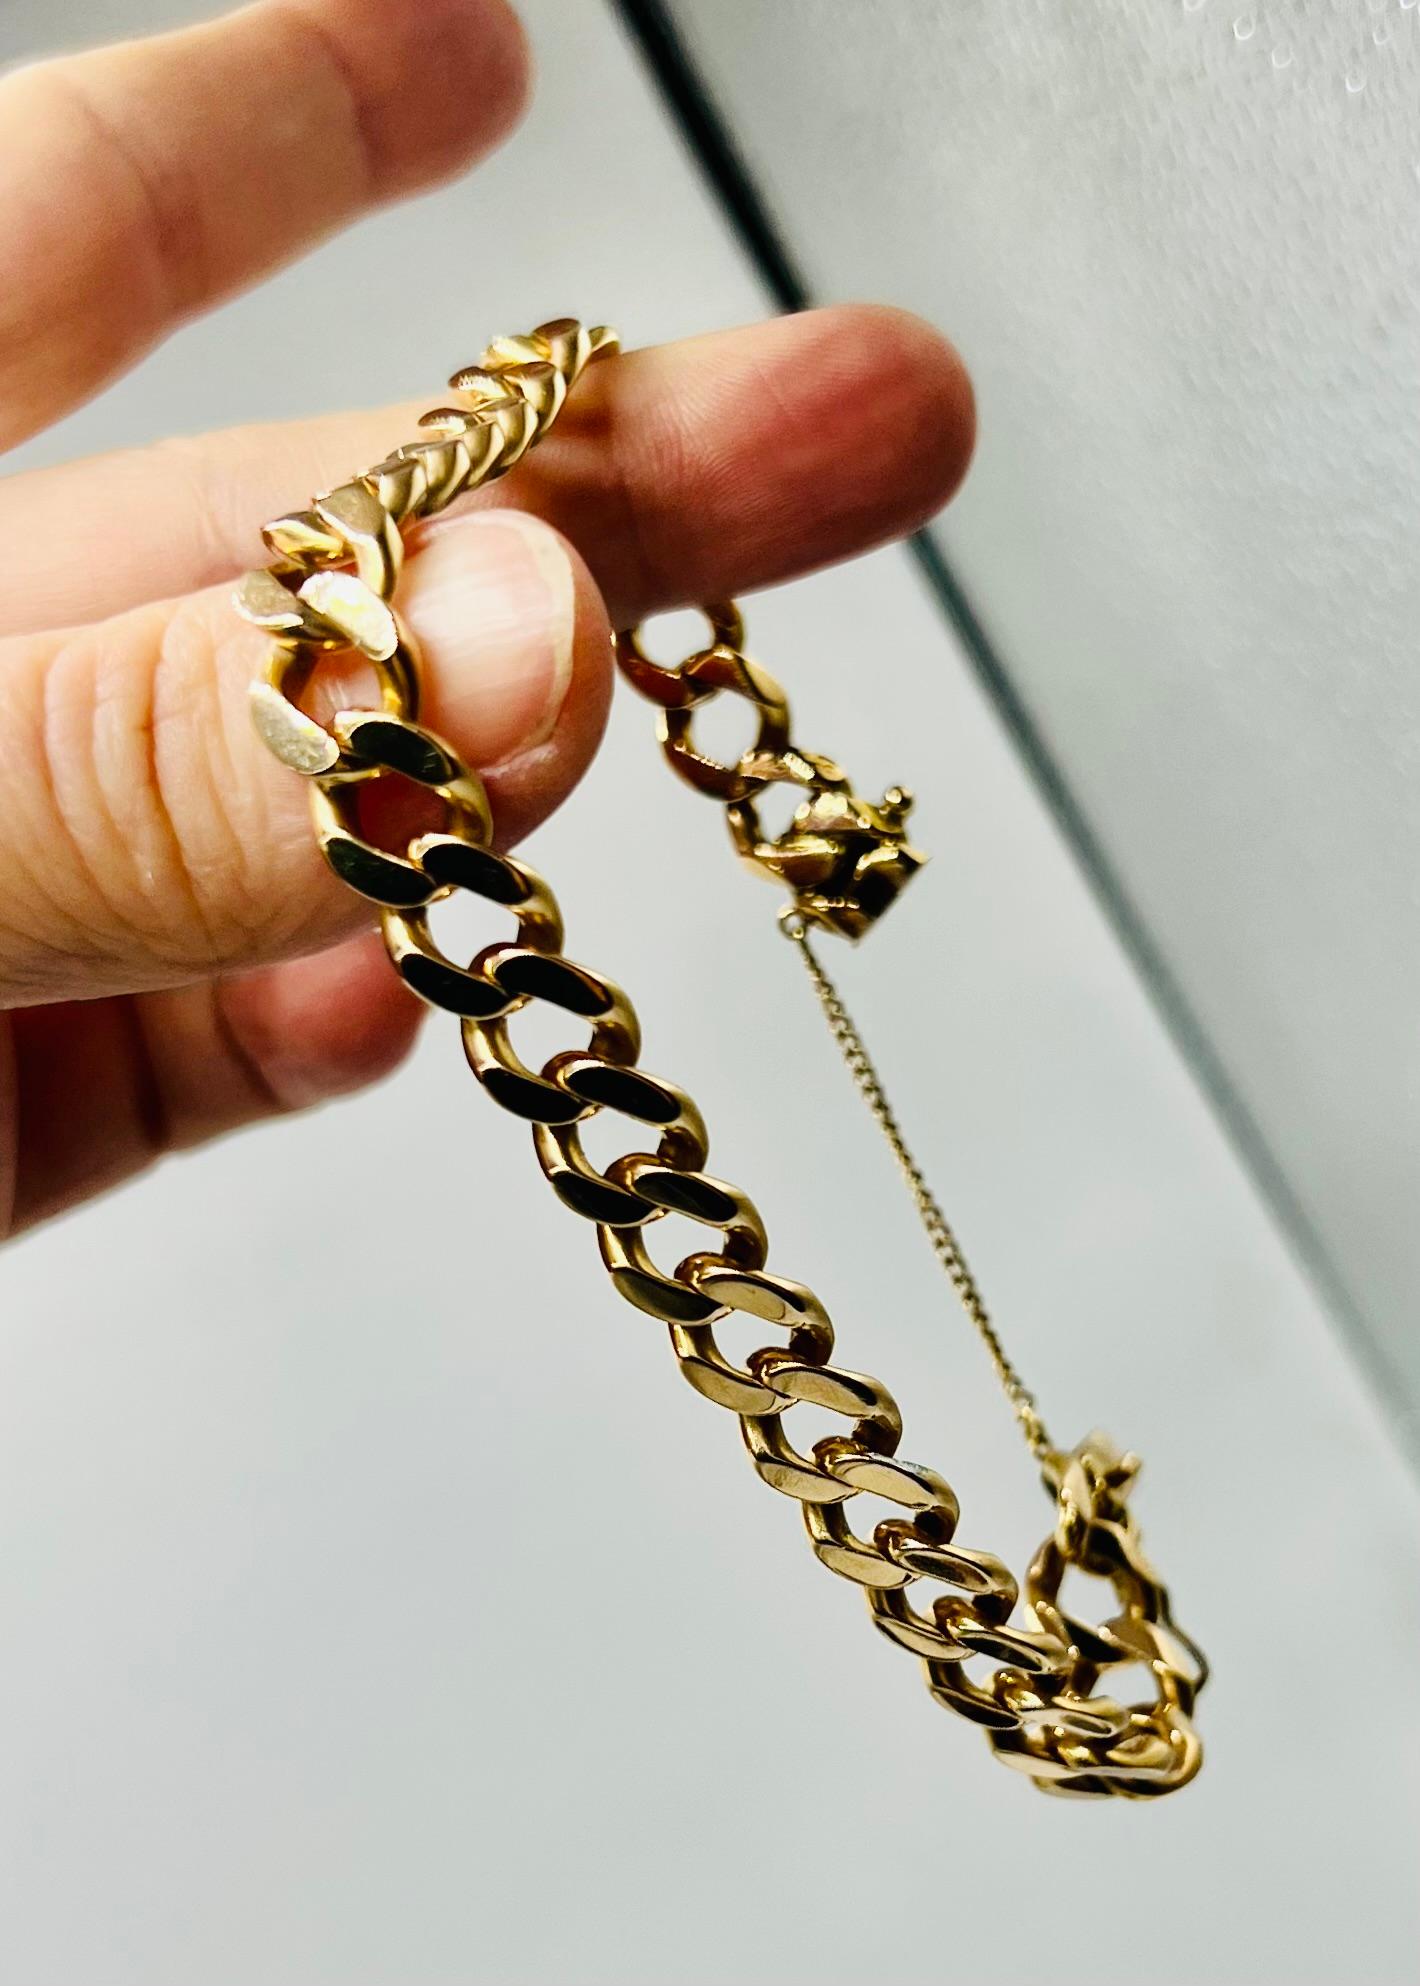 a bracelet in 18 carat gold, solid gold,
total weight: 44.60 grams
measuring approximately 20 centimeters and the width is approximately 0.90cm
In very good shape
can be worn by a man or a woman
resizing is possible and offered
do not hesitate to